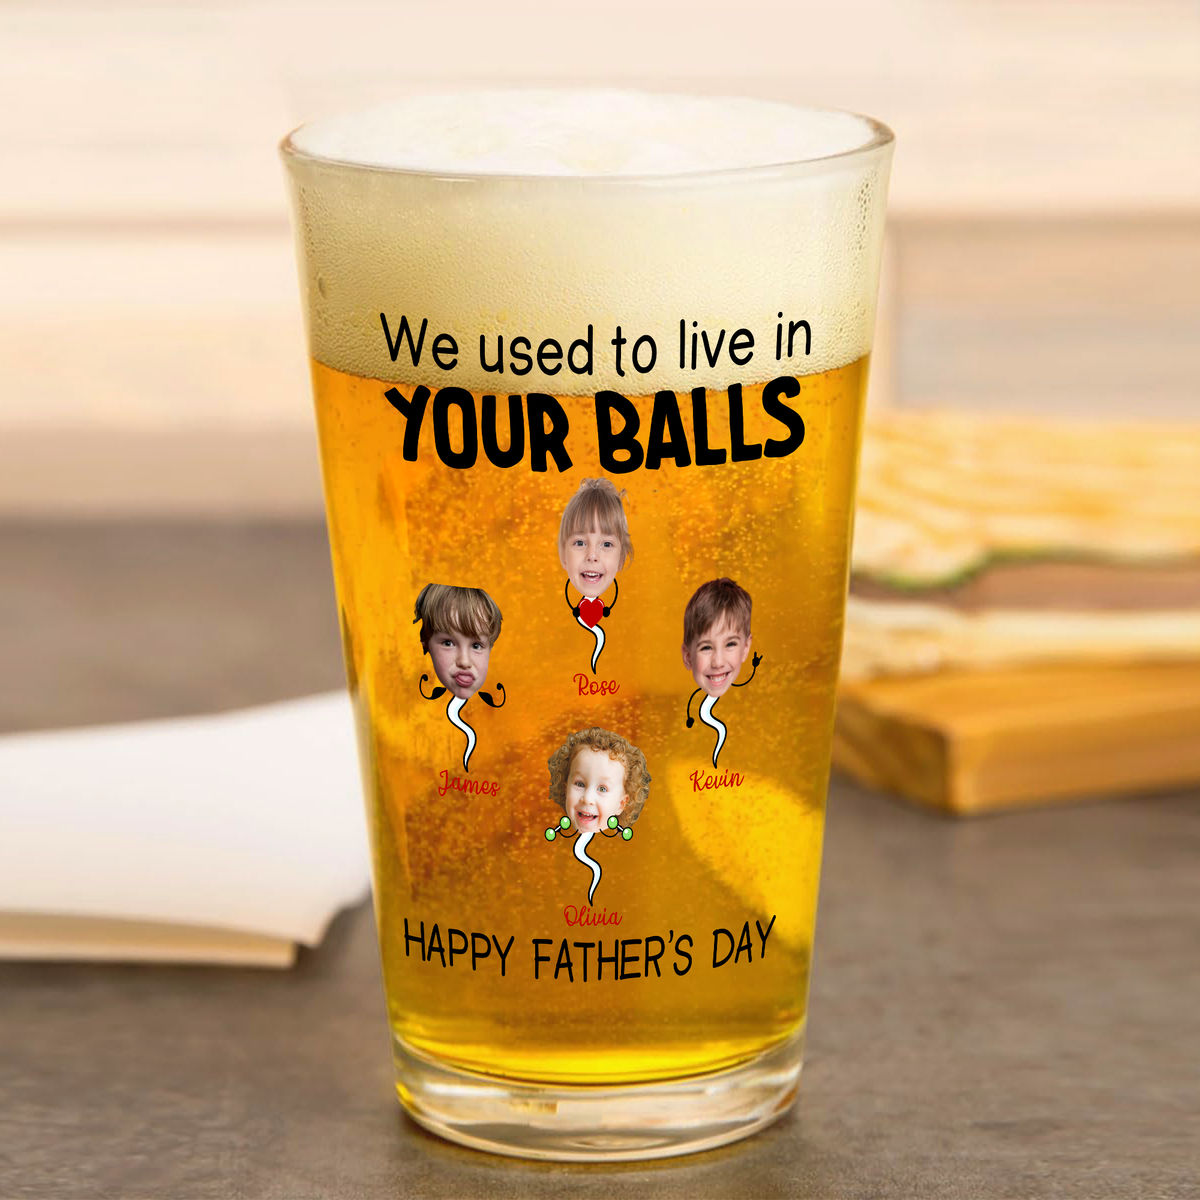 Photo Beer Glass - We used to lived in your balls. Happy Father's Day - Upto 5 Childrens - Father's Day Gift, Gift For Dad, Grandpa - Personalized Photo Beer Glass_1